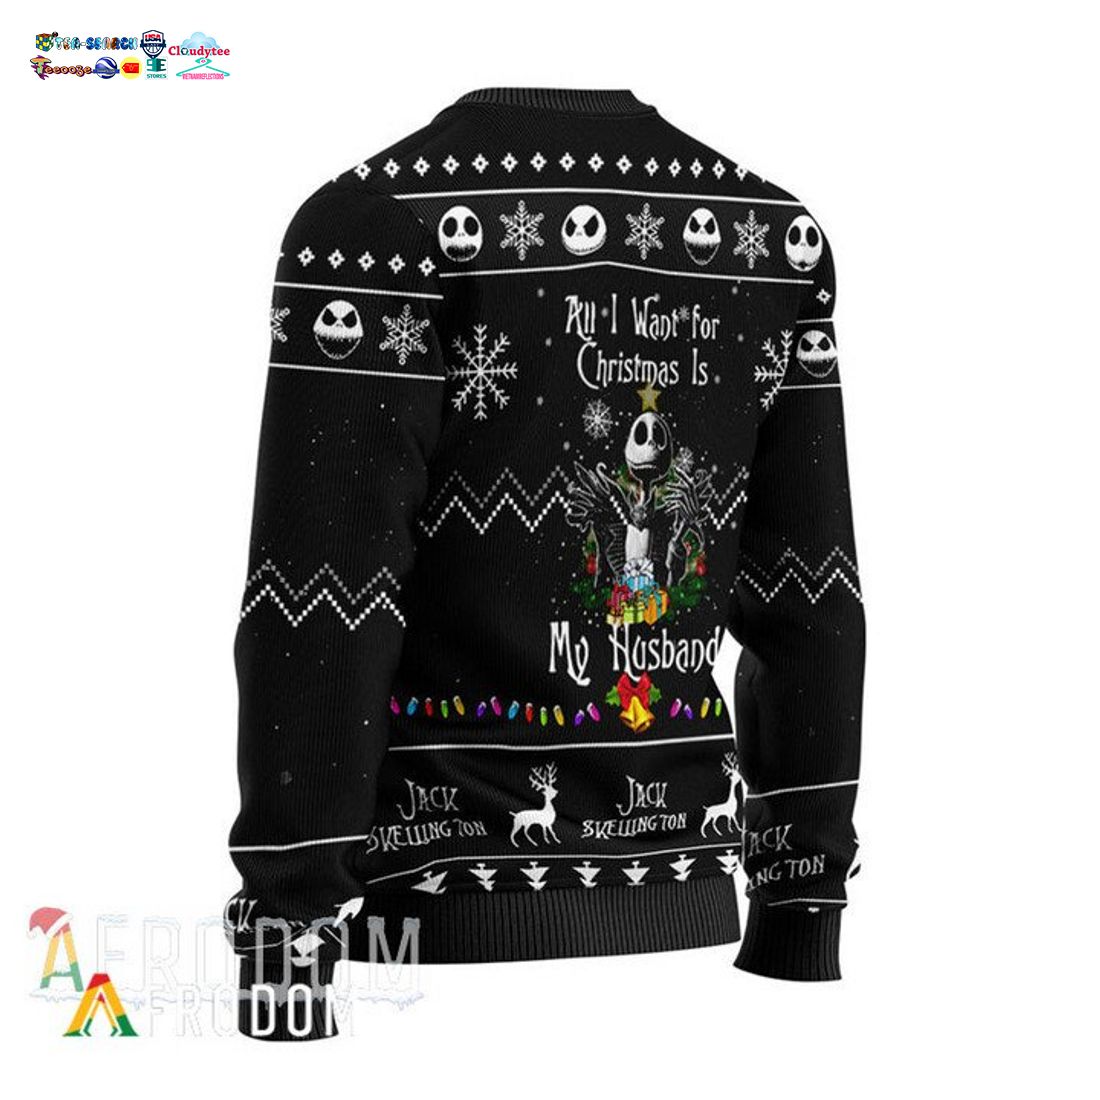 All I Want For Christmas Is My Husband Jack Skellington Christmas Sweater